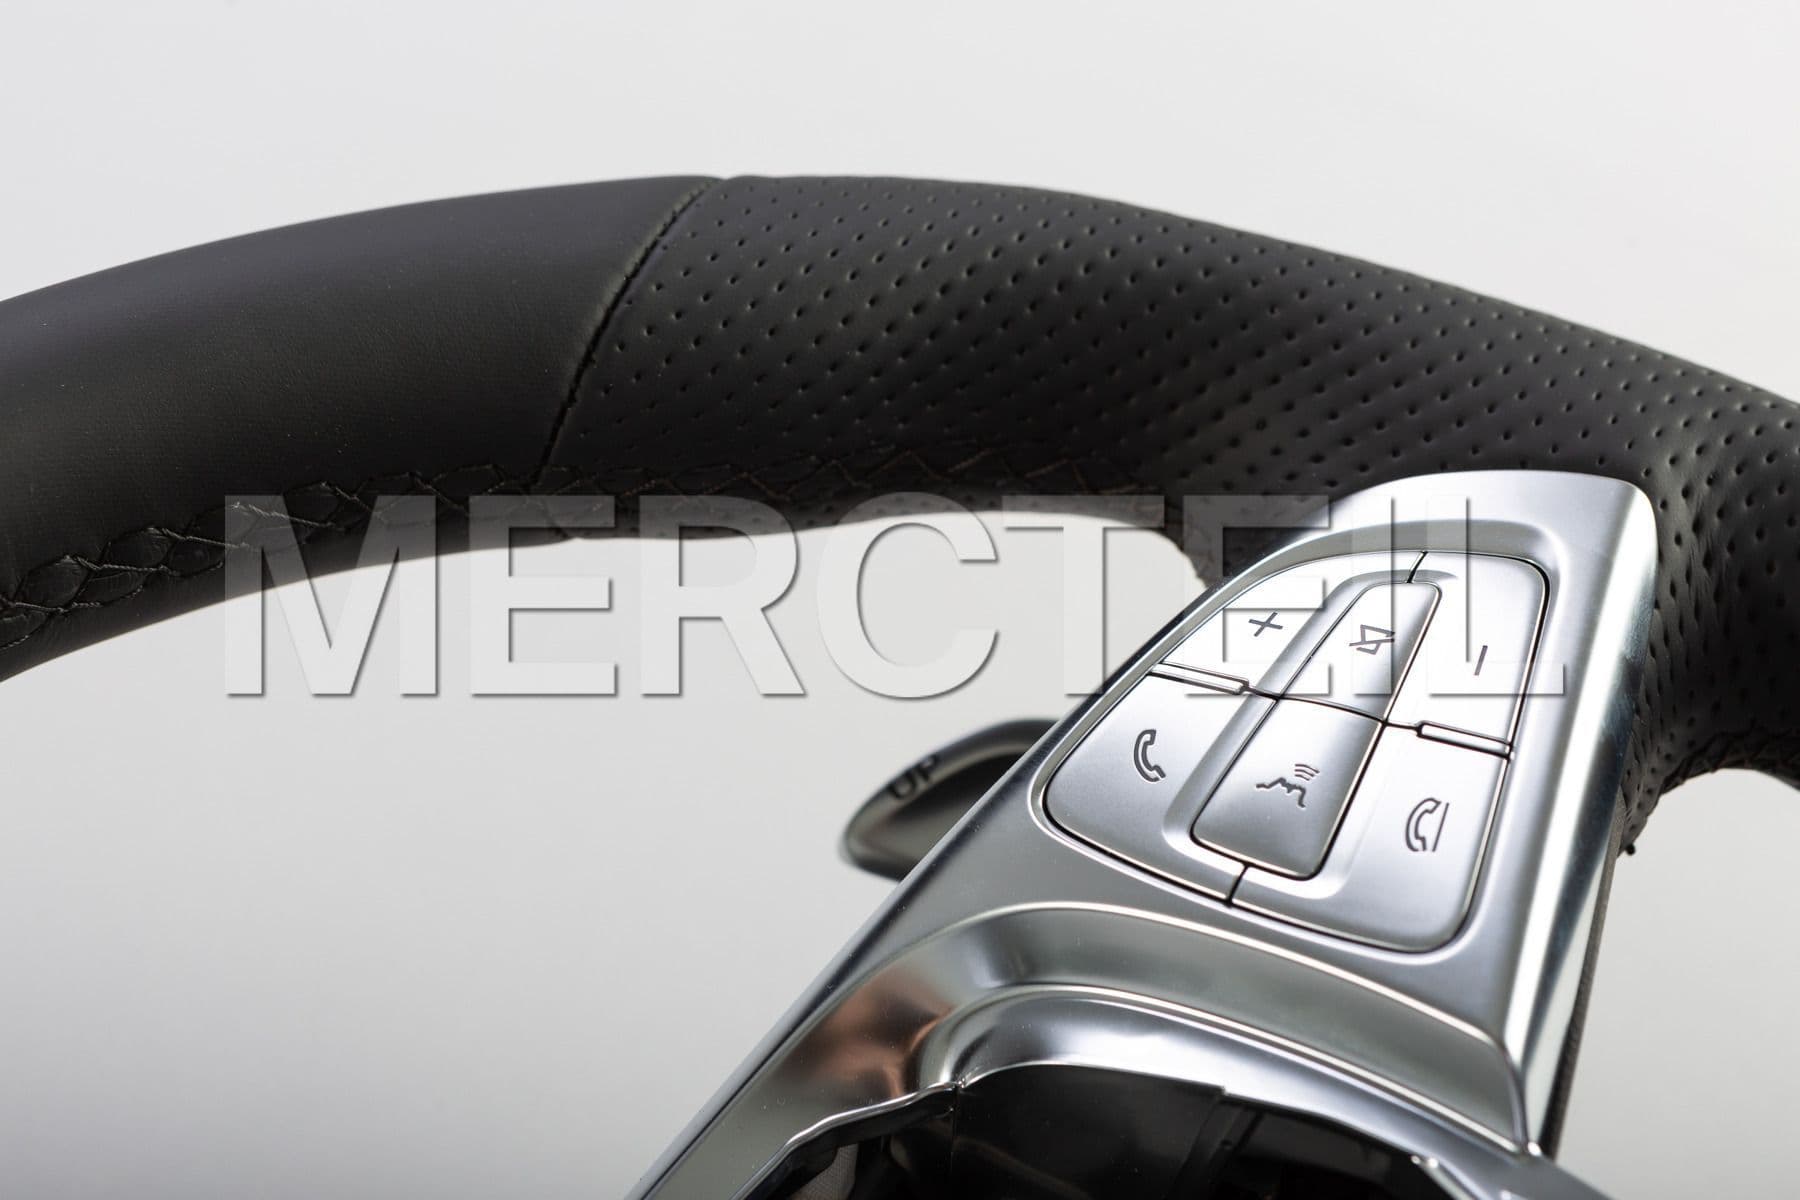 AMG Edition 1 Black Leather Steering Wheel for C-Class, S-Class Coupe; A21746001009E38.